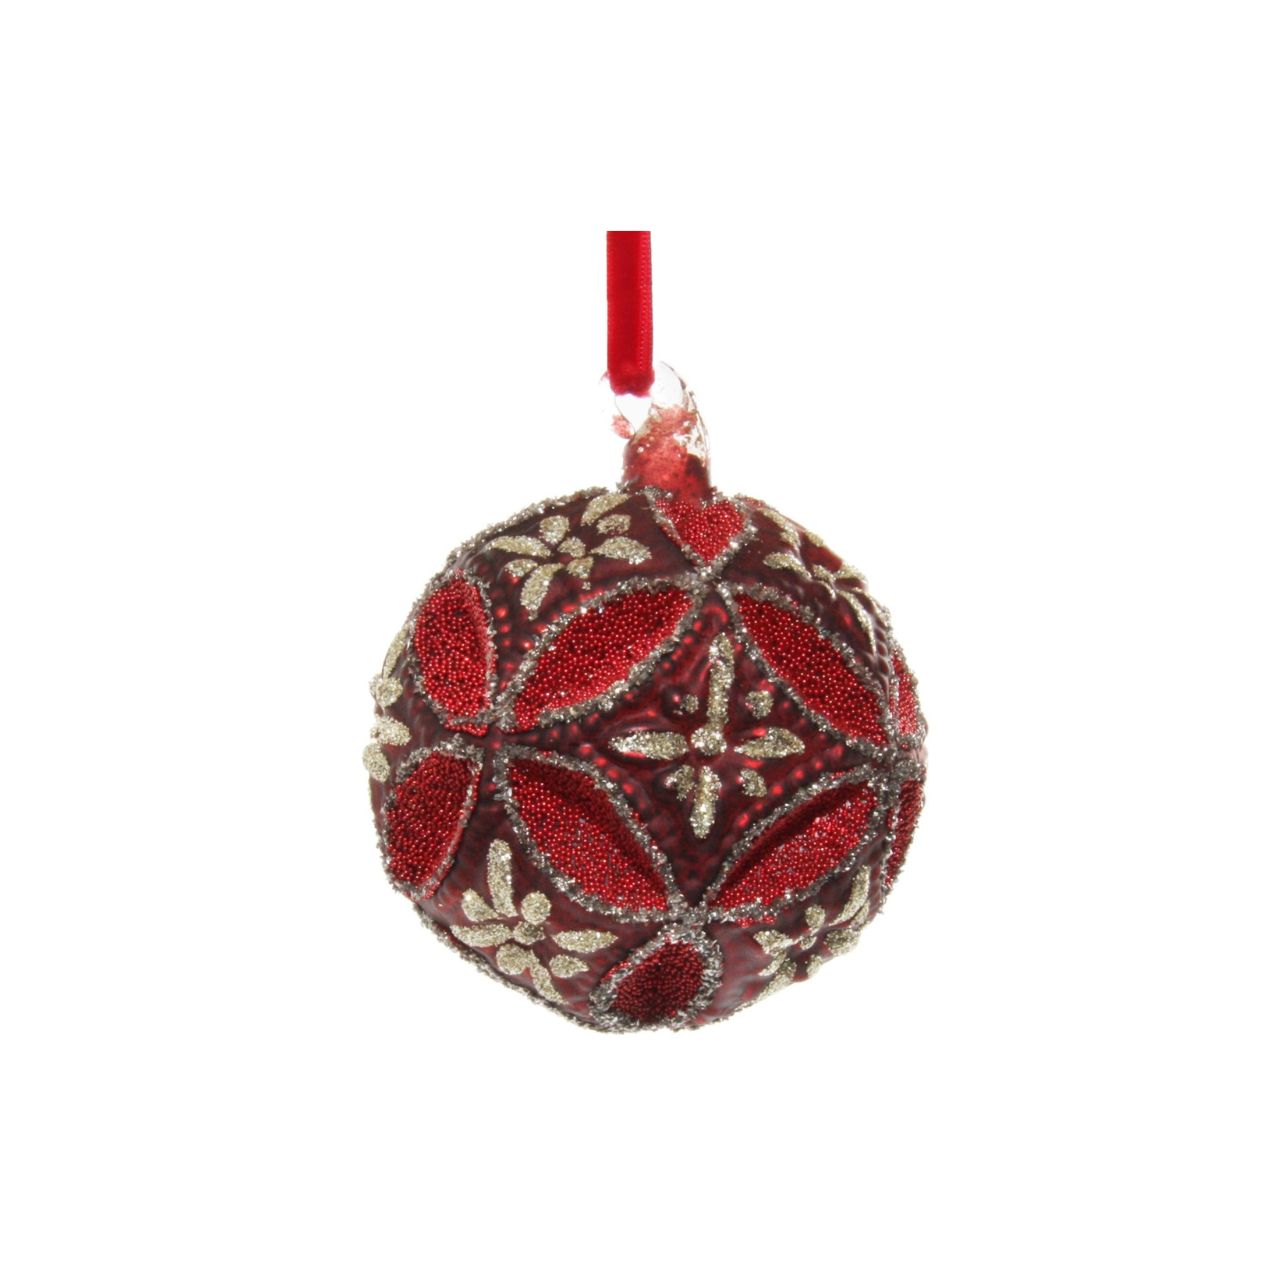 Shishi Burgundy Glass Floral Jewel Ball with Silver Glitter  Browse our beautiful range of luxury festive Christmas tree decorations, baubles & ornaments for your tree this Christmas.